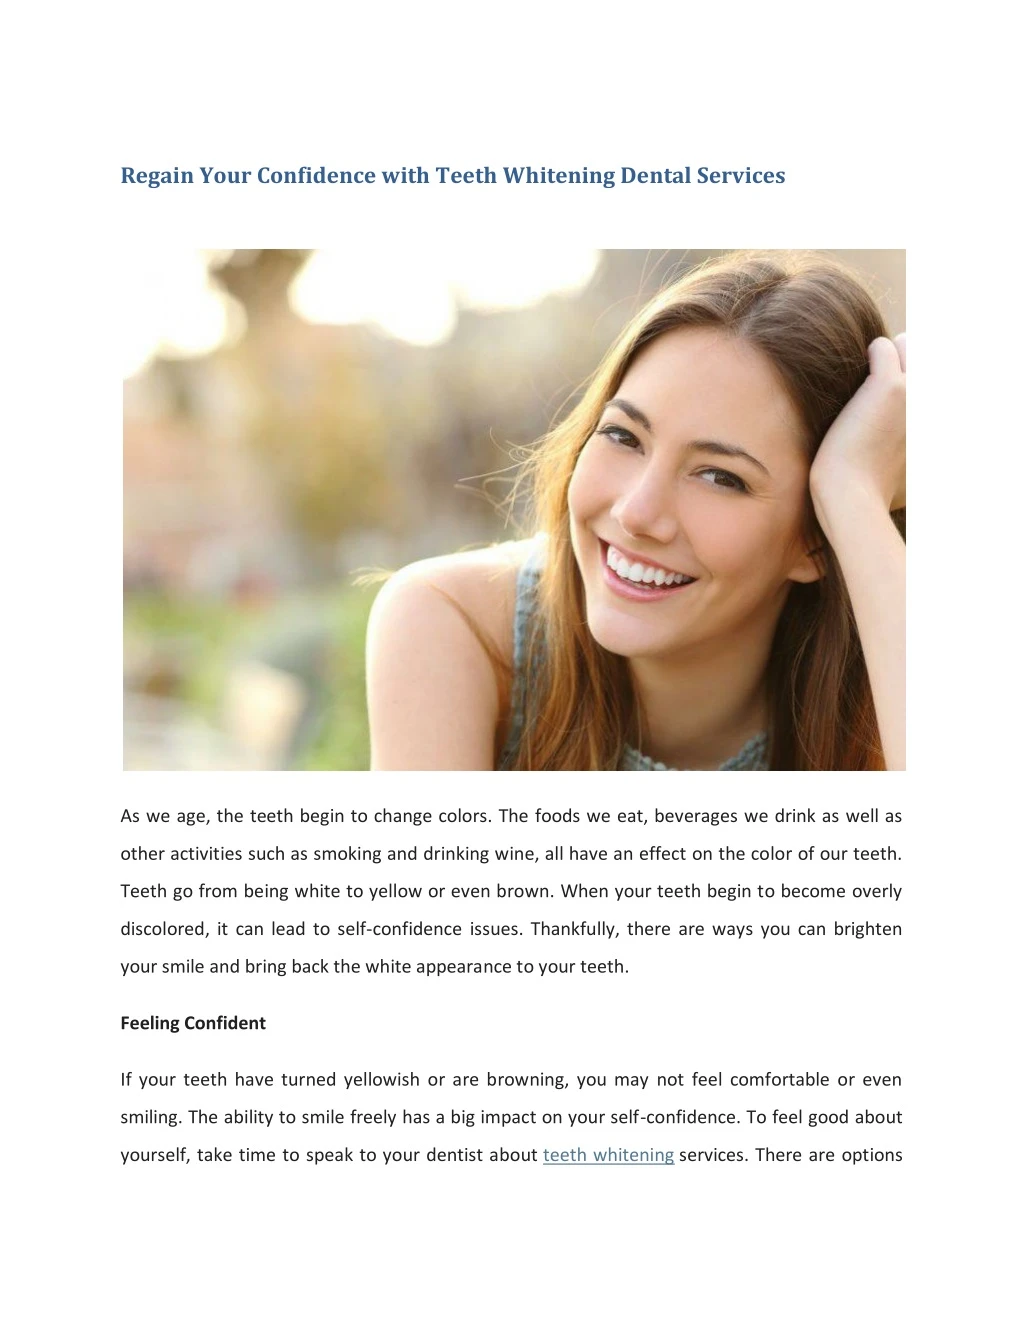 regain your confidence with teeth whitening